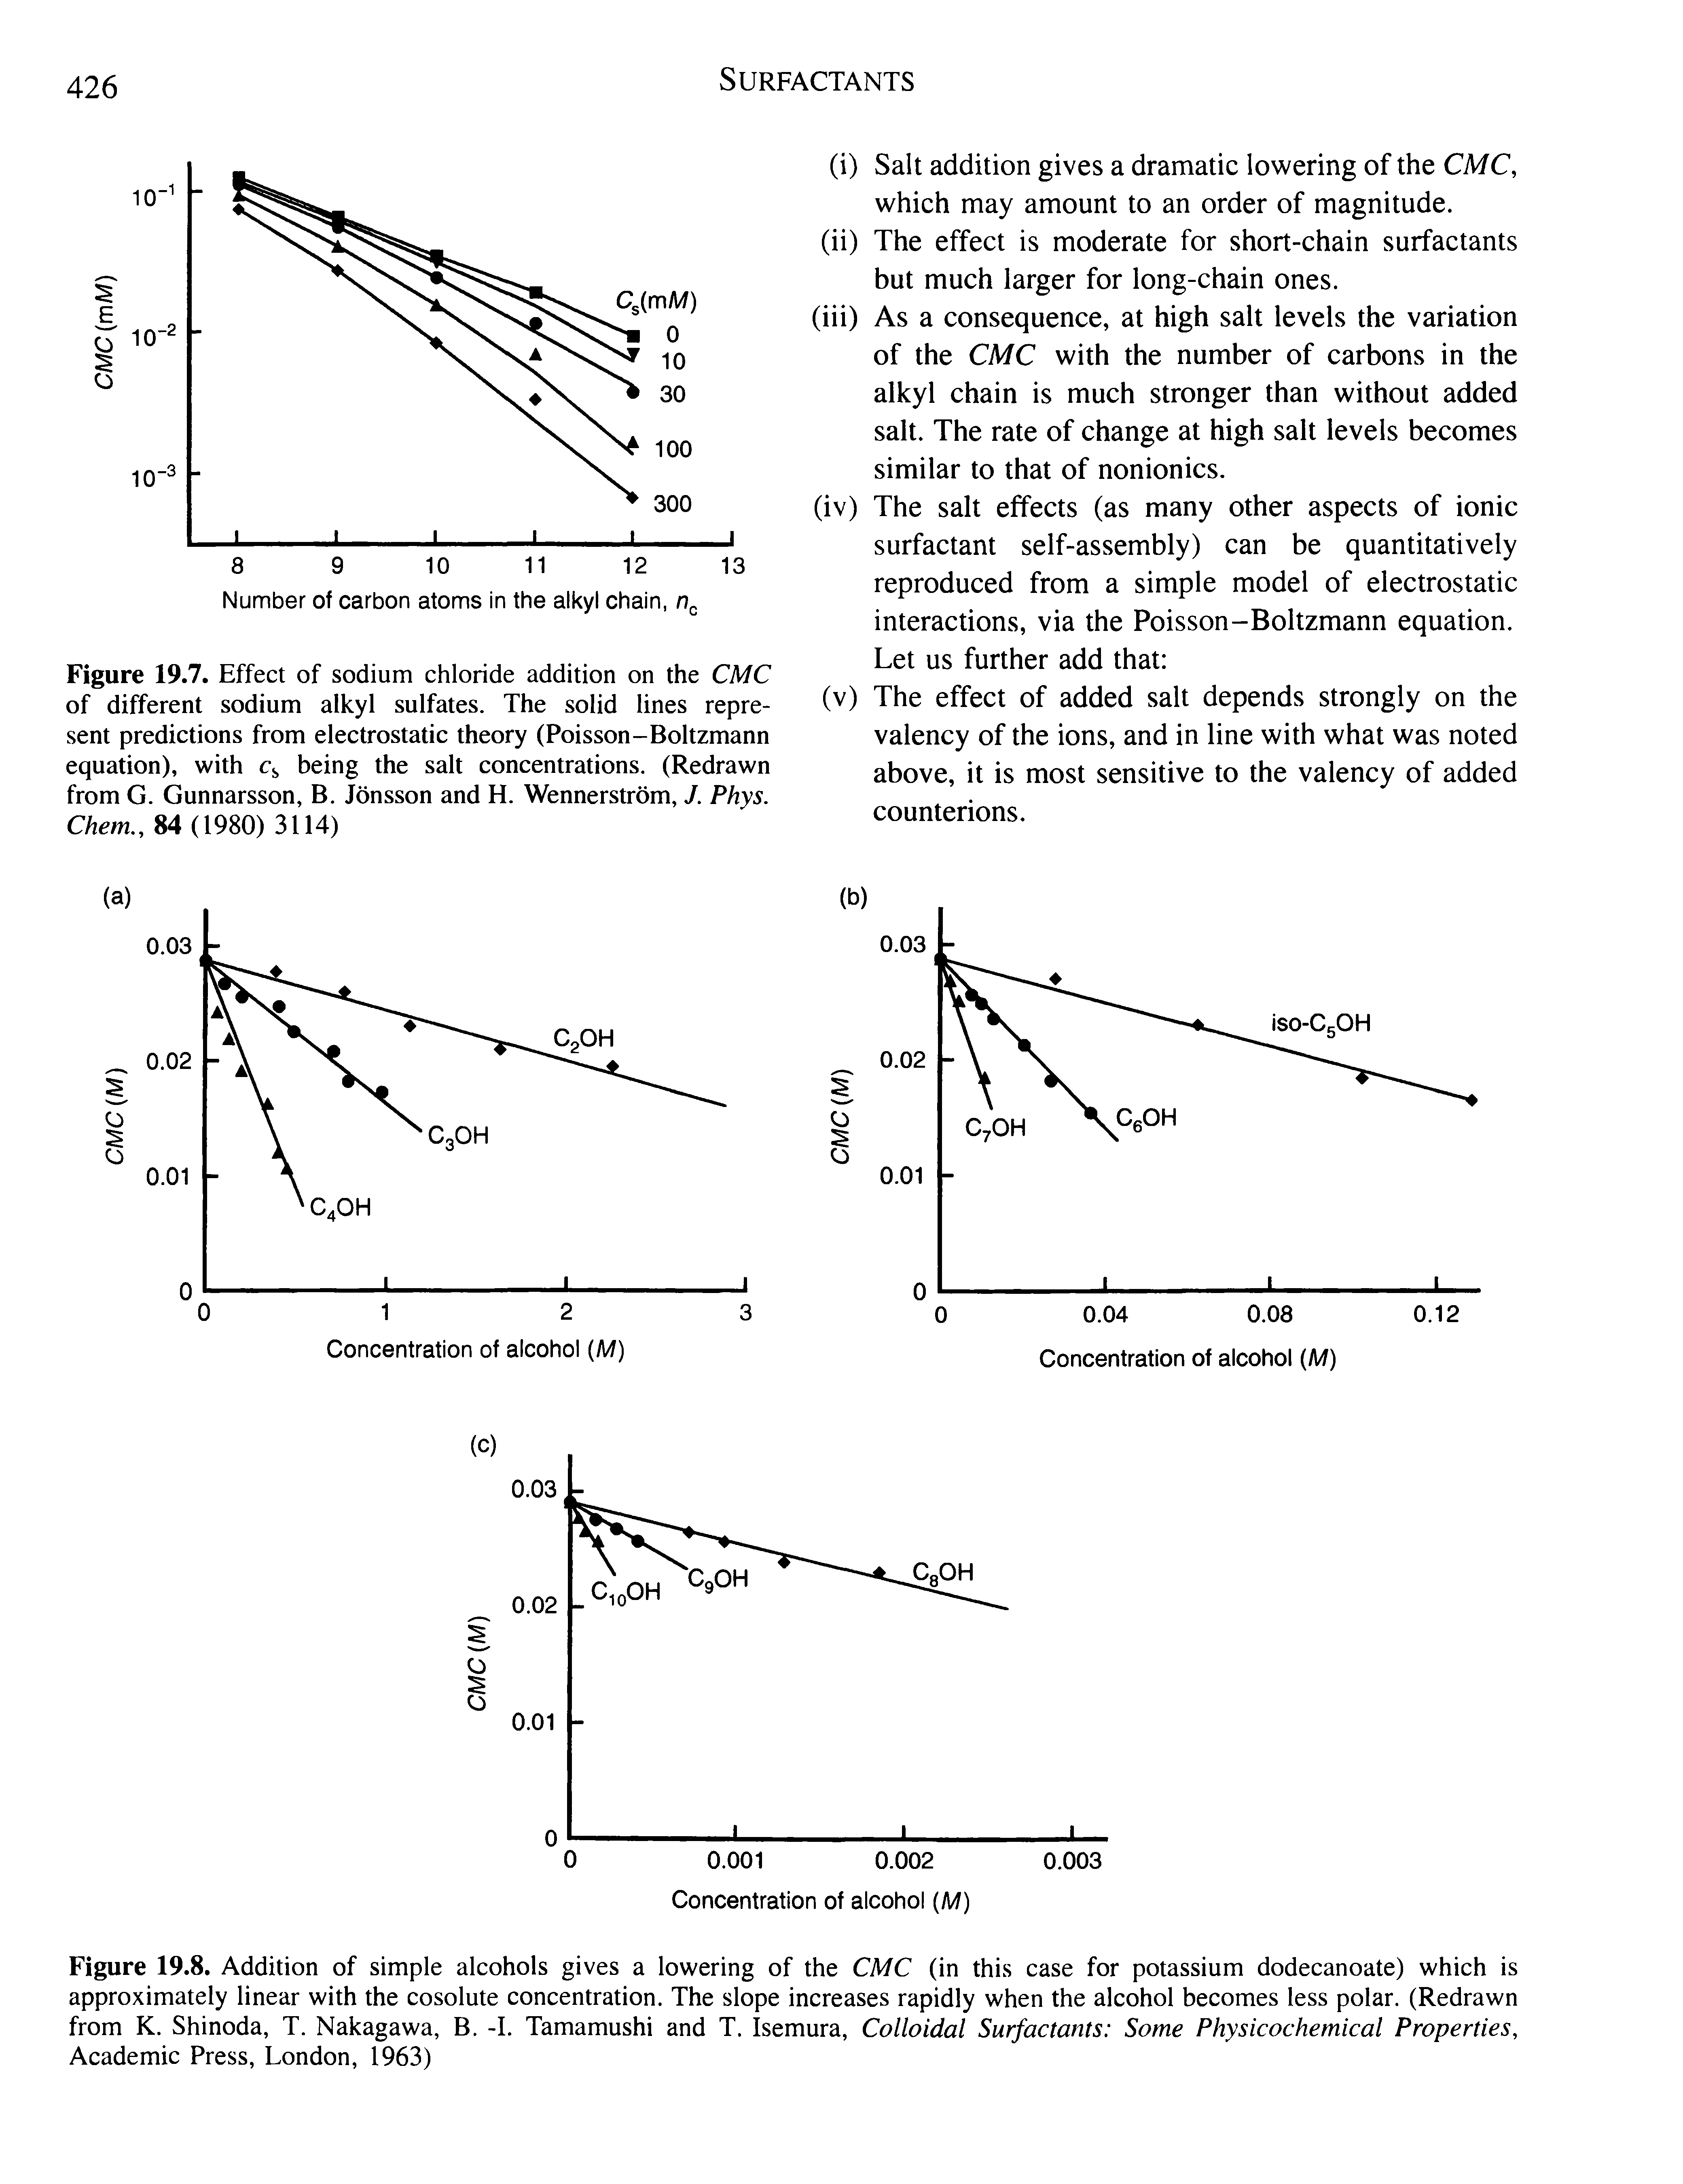 Figure 19.8. Addition of simple alcohols gives a lowering of the CMC (in this case for potassium dodecanoate) which is approximately linear with the cosolute concentration. The slope increases rapidly when the alcohol becomes less polar. (Redrawn from K. Shinoda, T. Nakagawa, B. -I. Tamamushi and T. Isemura, Colloidal Surfactants Some Physicochemical Properties, Academic Press, London, 1963)...